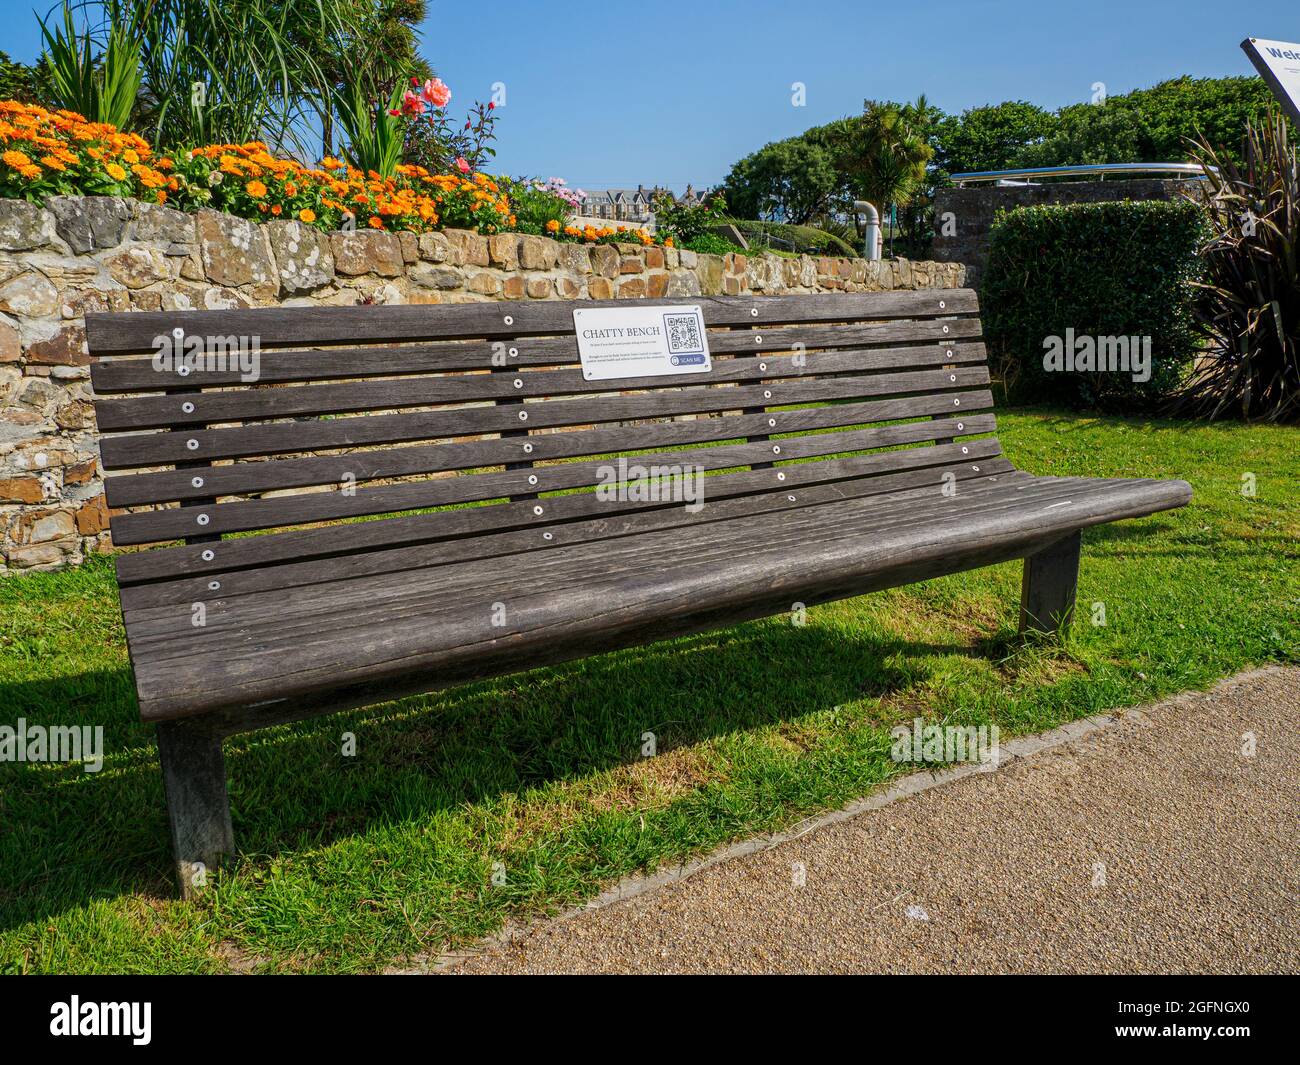 chatty bench, chatty, bench, seat, encourage, tackle, loneliness, encourage, conversation, mental health, support, QR codes, Bude, Cornwall, UK, GB, G Stock Photo